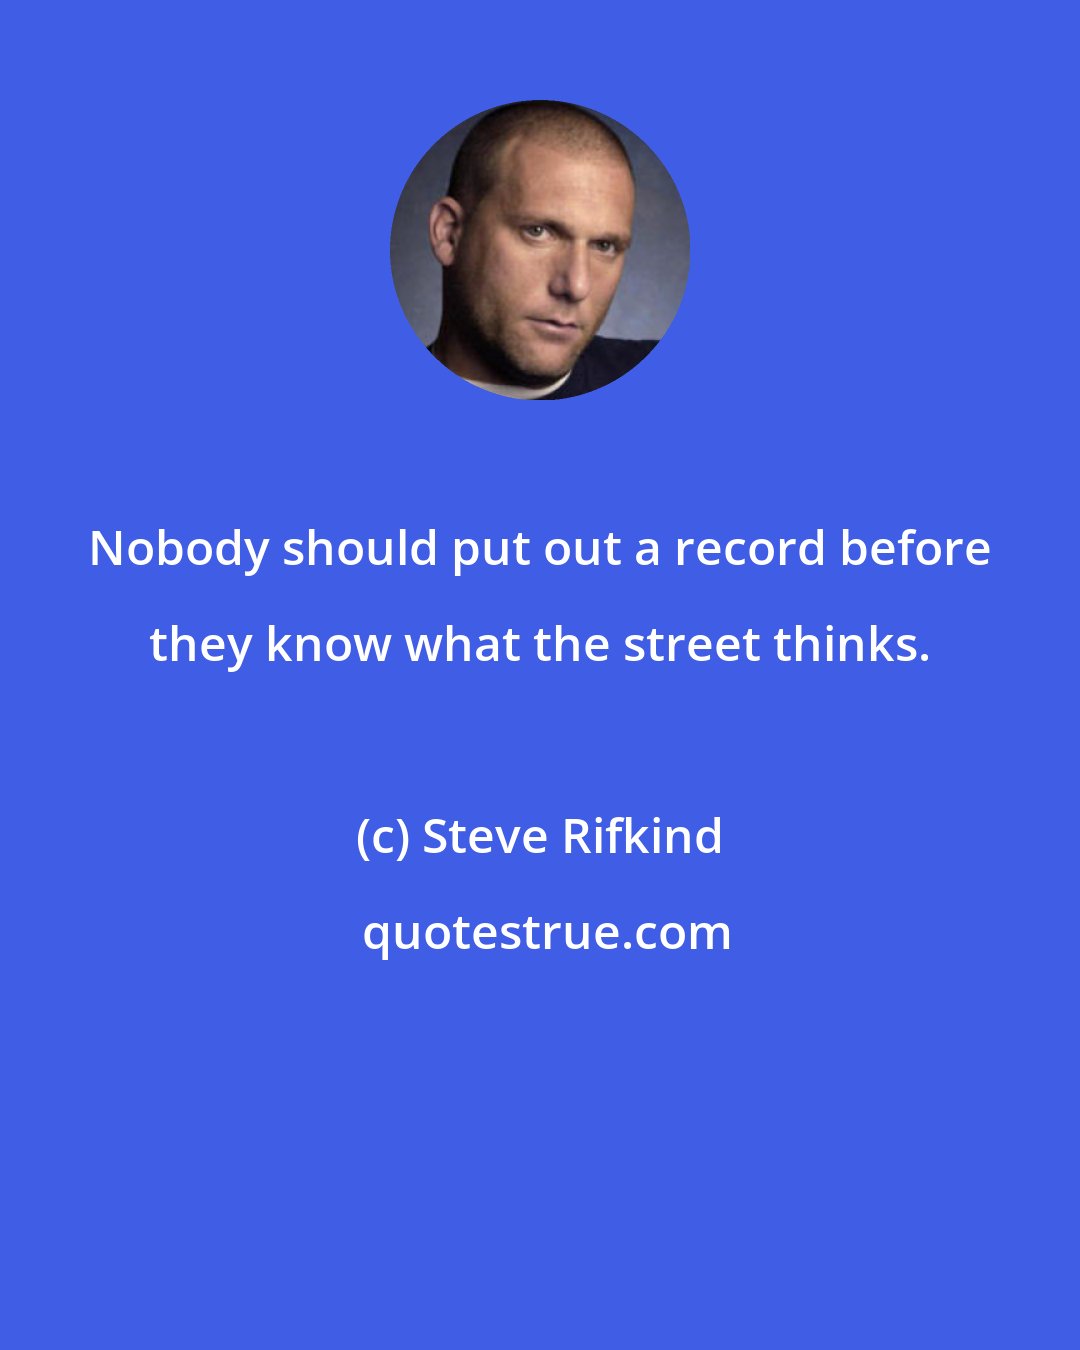 Steve Rifkind: Nobody should put out a record before they know what the street thinks.